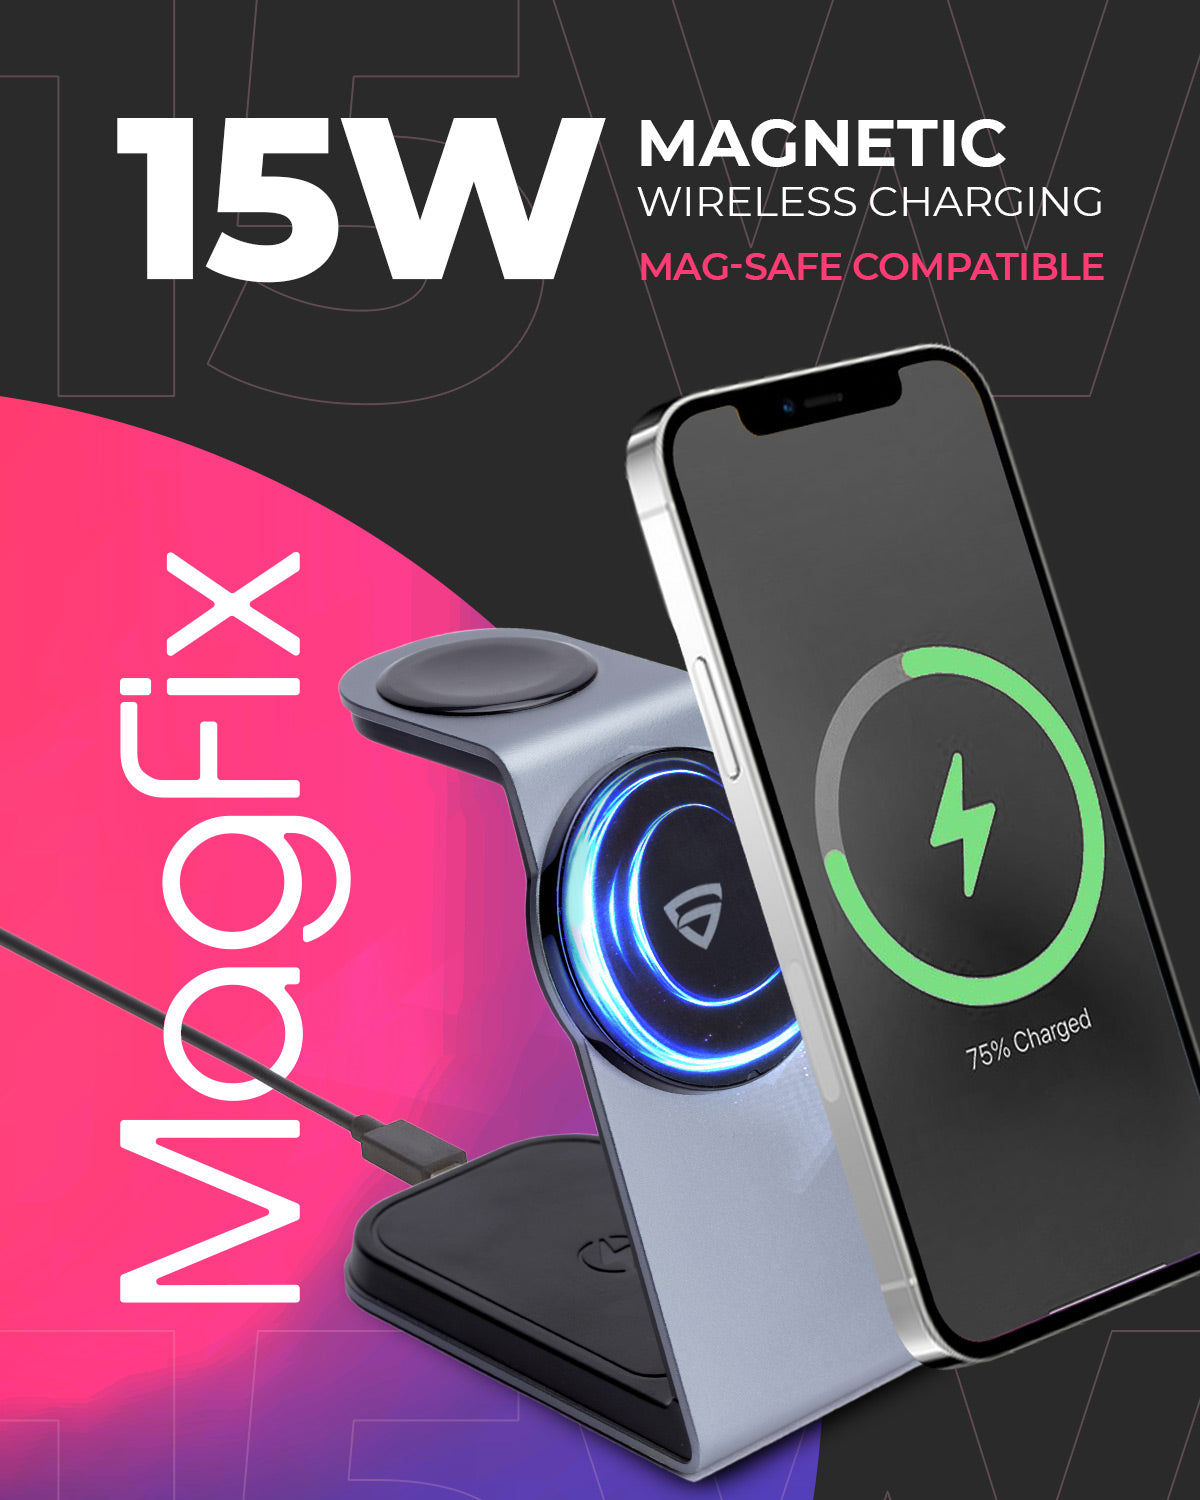 RAEGR MagFix Arc M1050 |3 in 1| 23W Mag-Safe Compatible Wireless Charging Stand